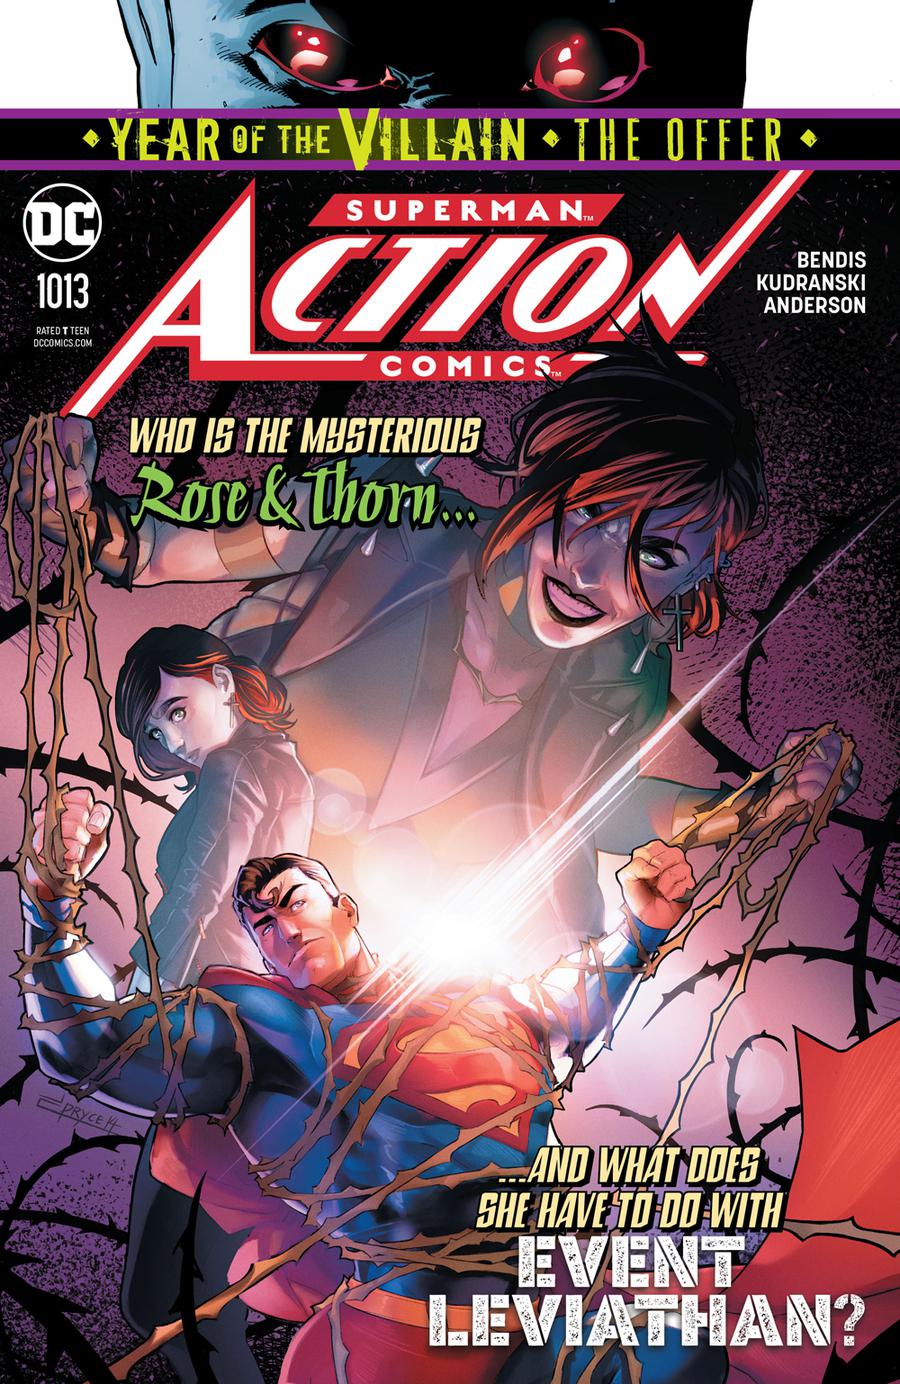 Action Comics Vol 2 #1013 Cover A Regular Jamal Campbell Cover (Year Of The Villain The Offer Tie-In)